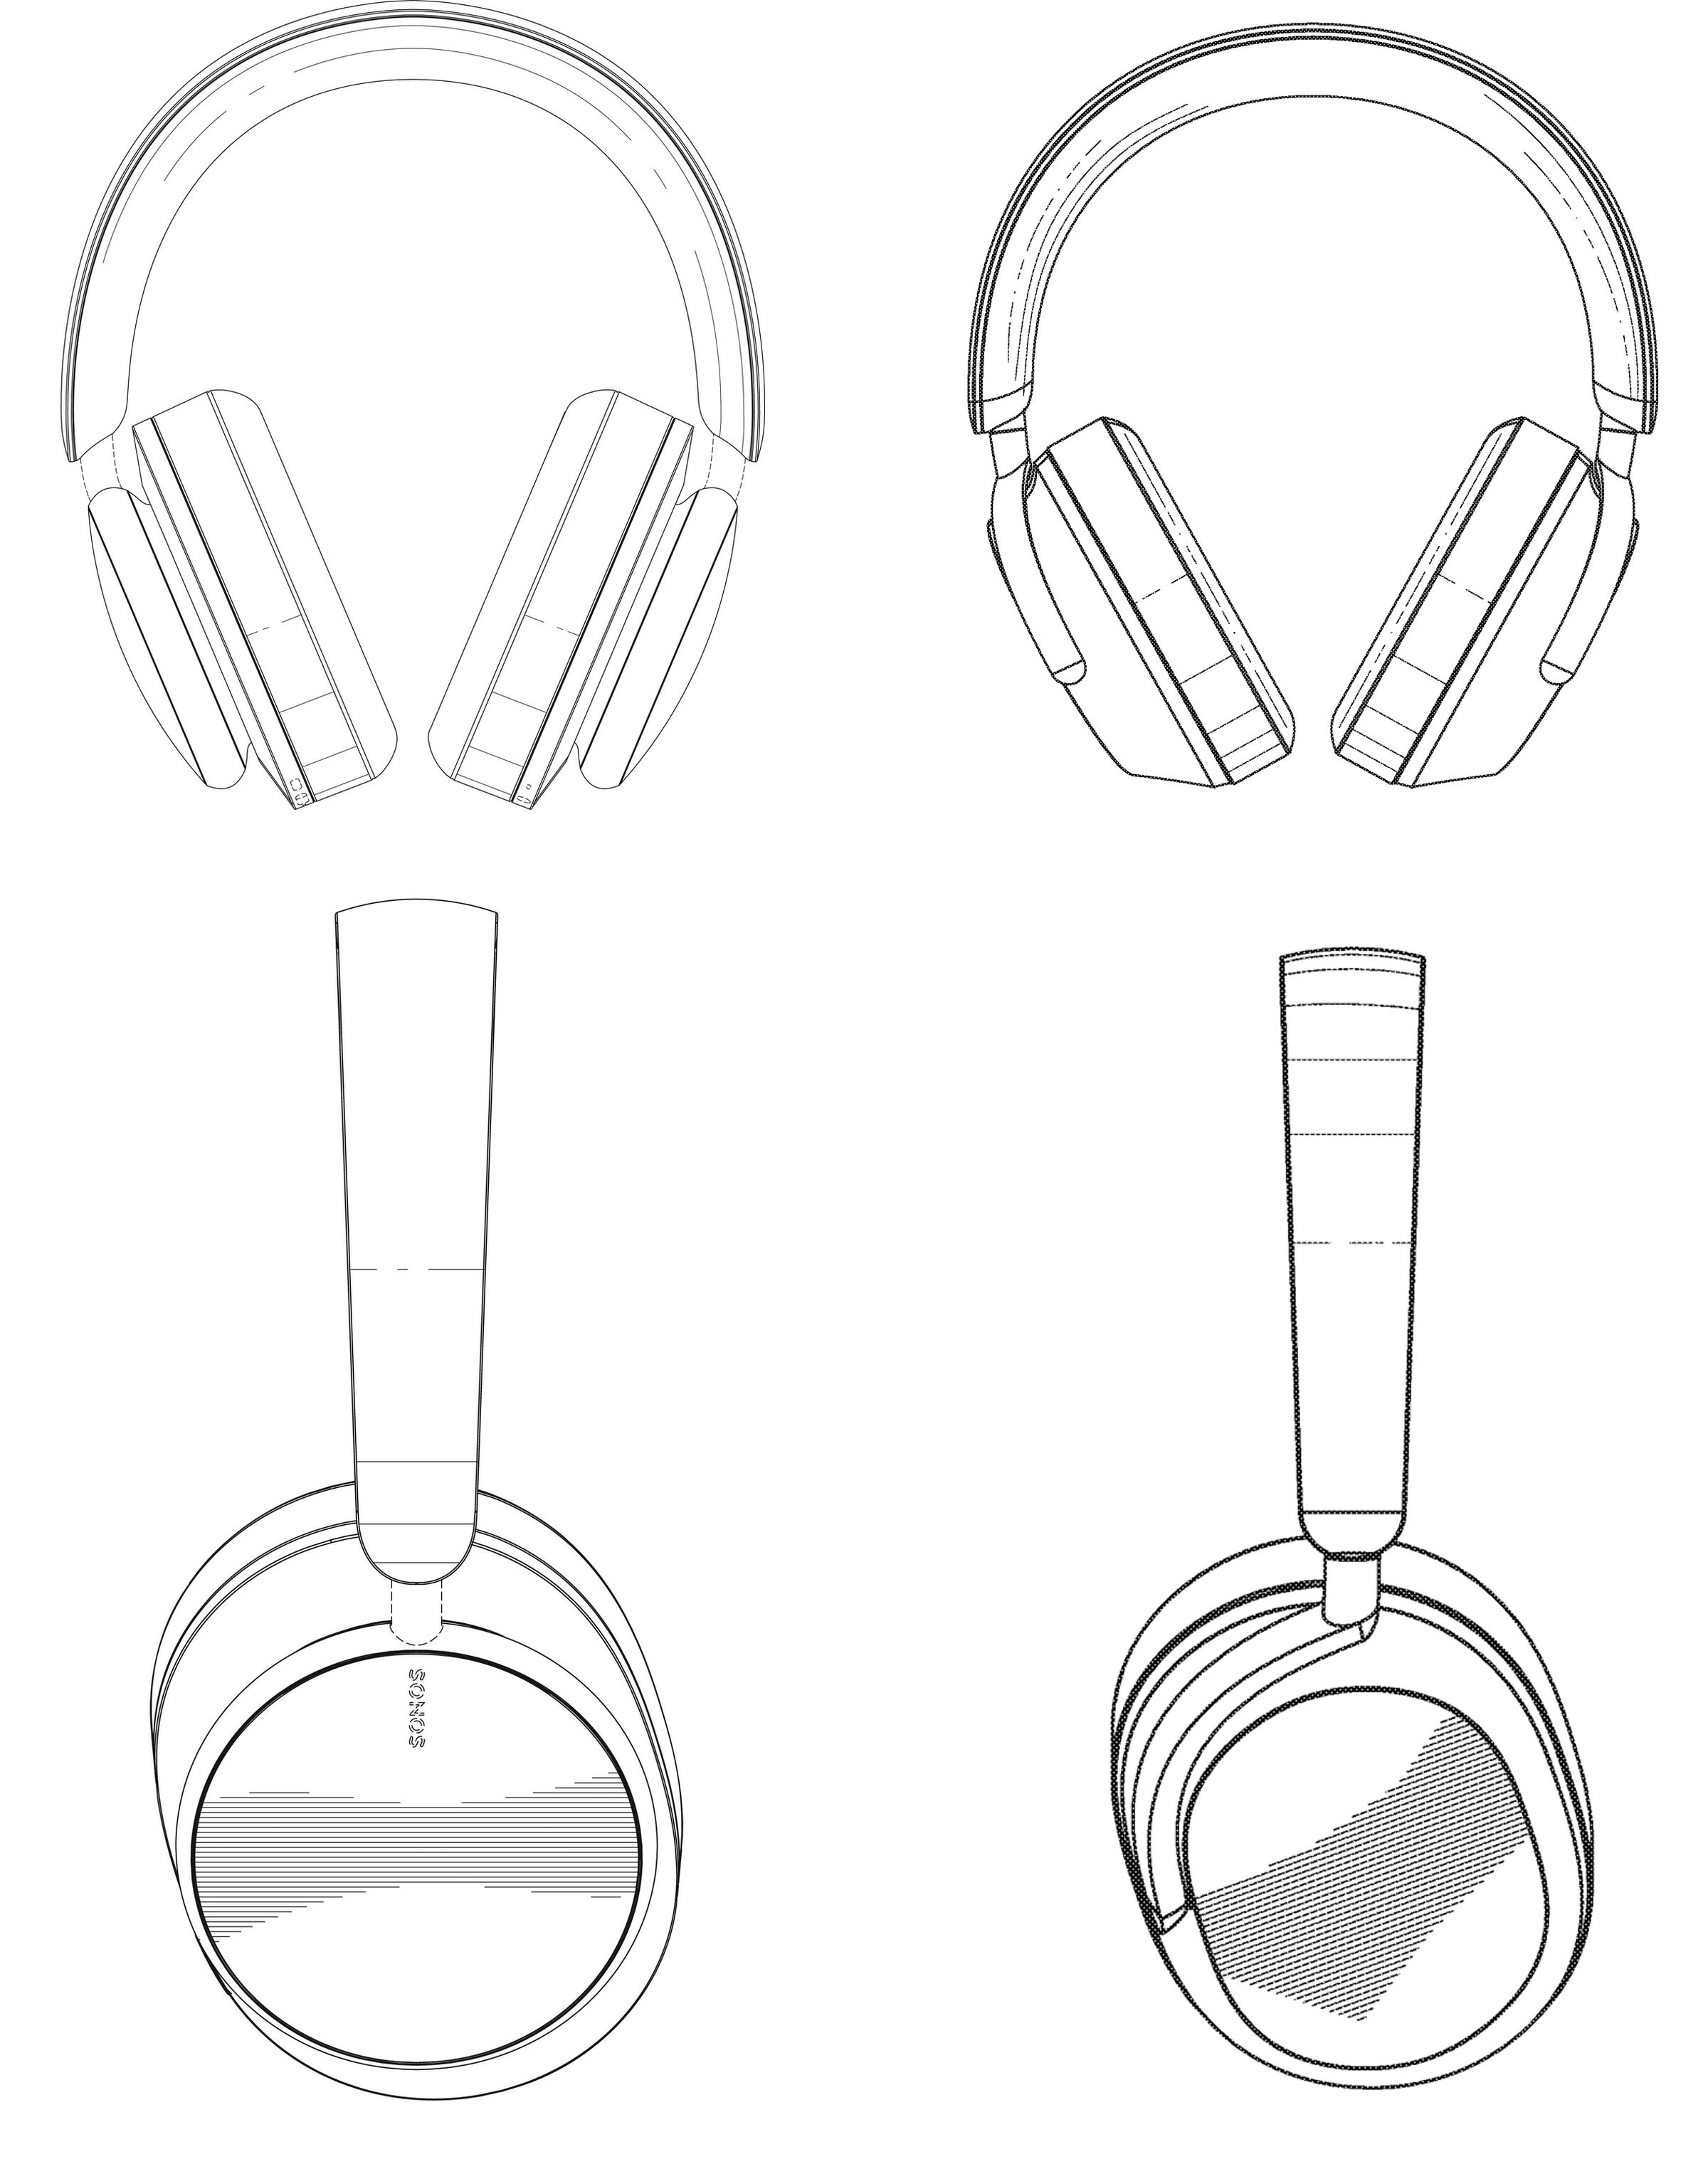 The latest headphone patent from Sonos (left) shows a more refined design than an earlier USPTO filing (right).